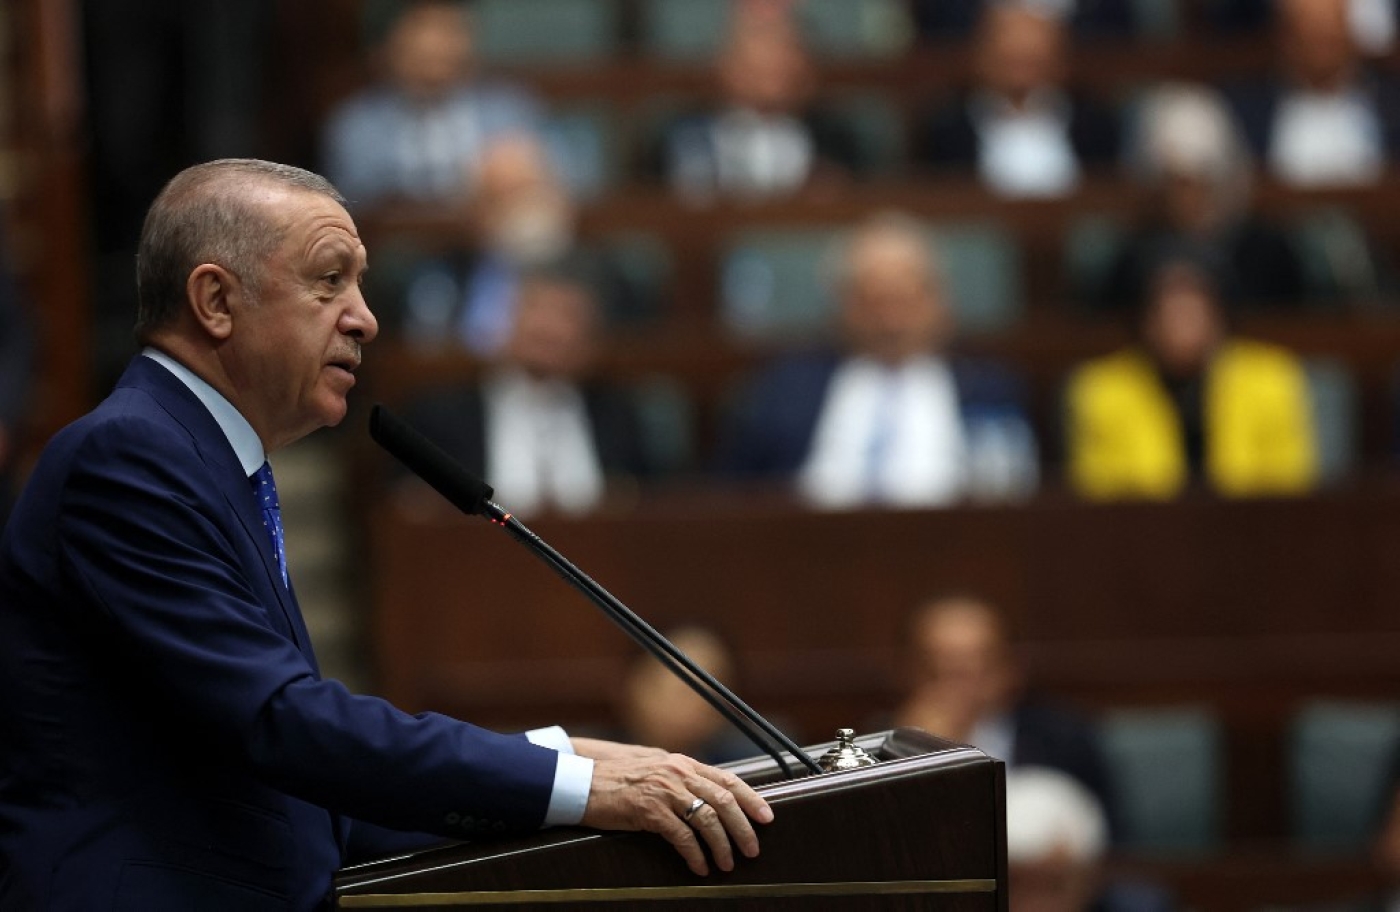 Turkey's President and leader of the Justice and Development (AK) Party Recep Tayyip Erdogan delivers a speech during his party’s group meeting at the Turkish Grand National Assembly (TGNA) in Ankara, on May 18, 2022. (AFP)